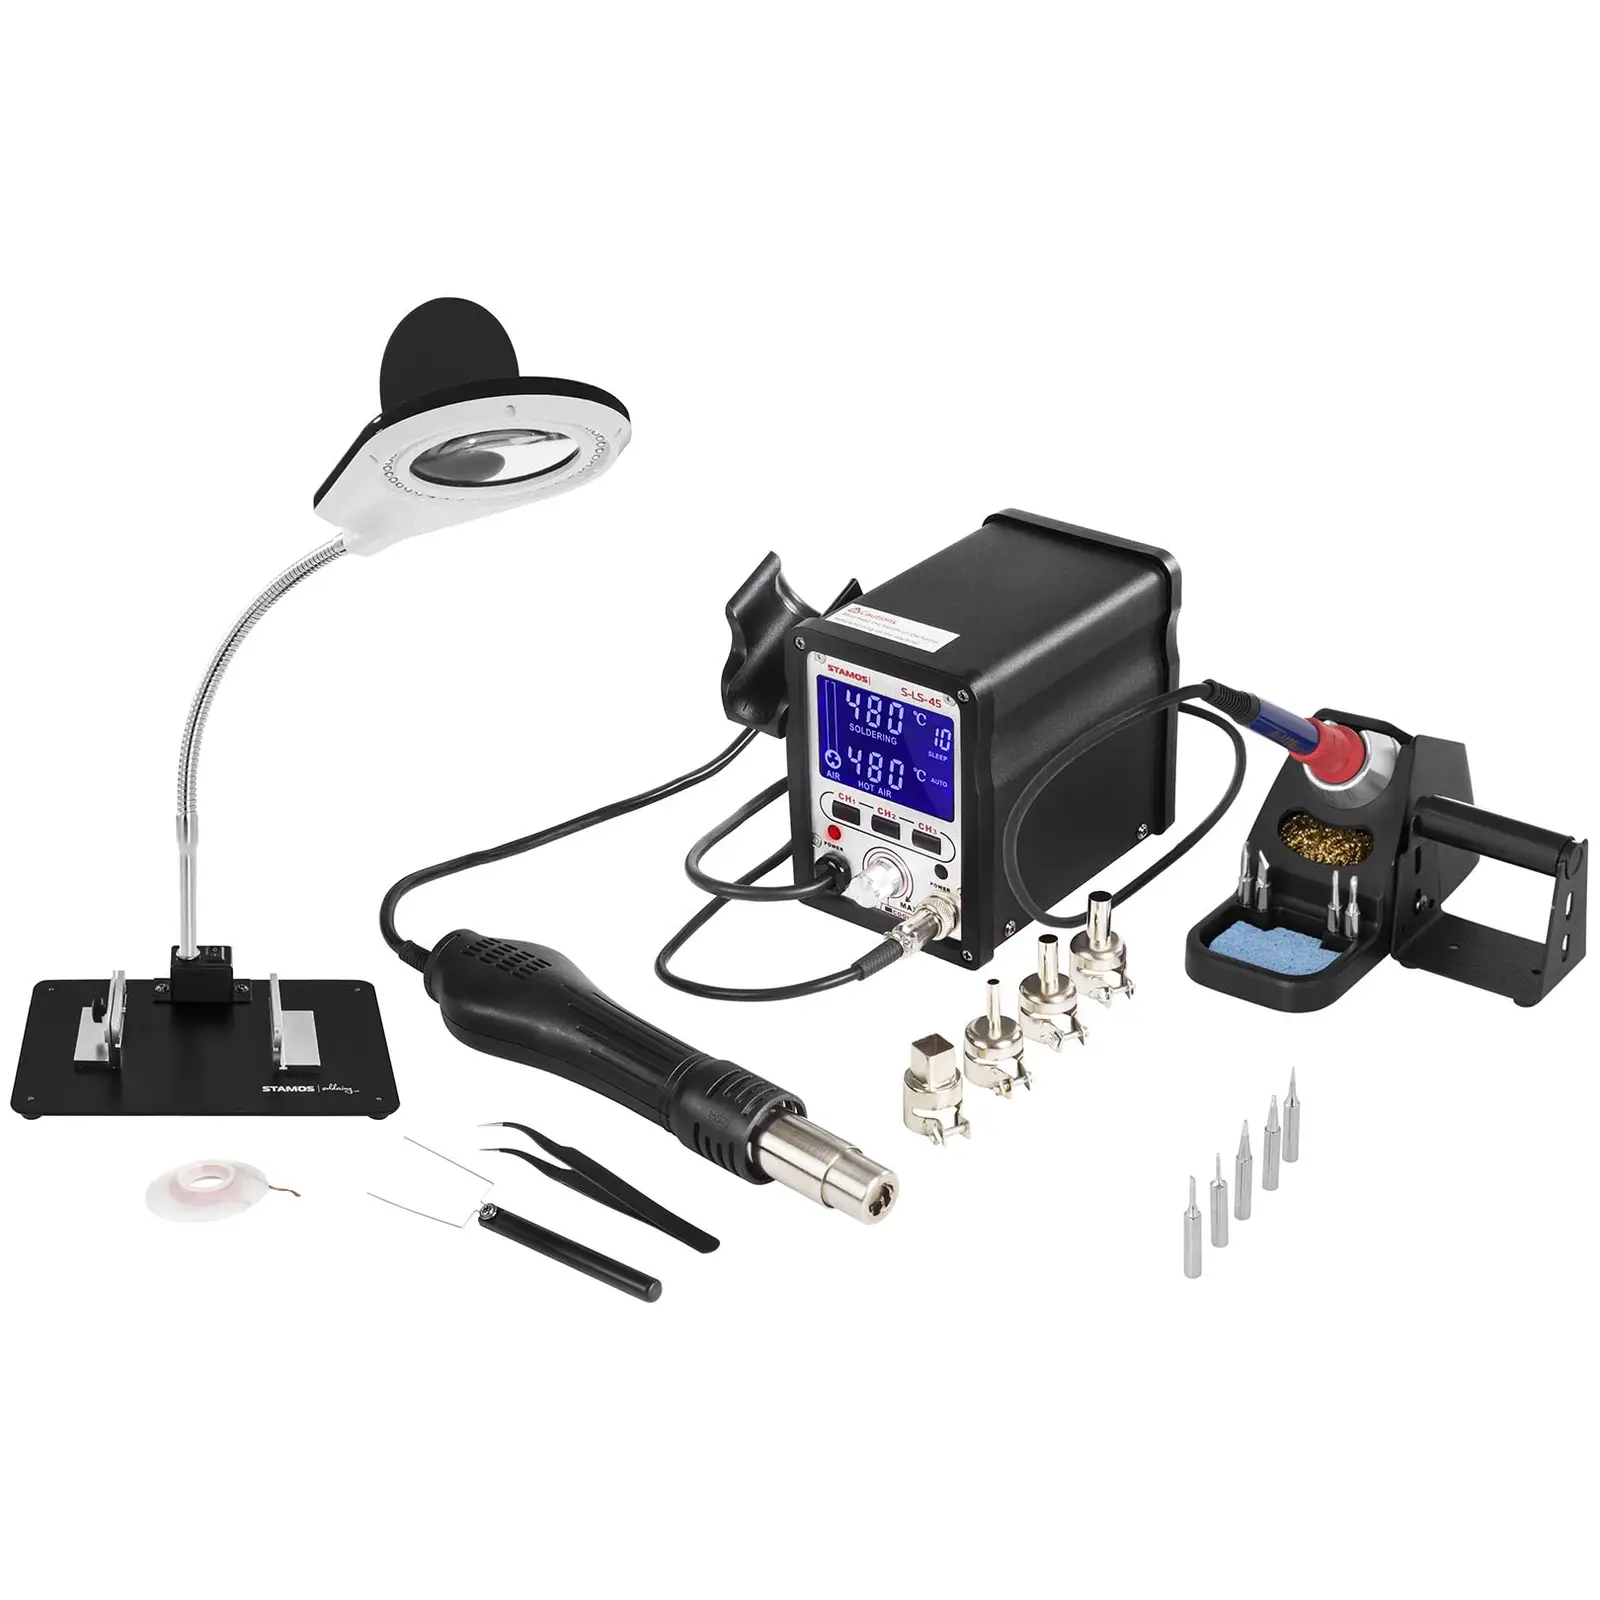 Digital Soldering Station - 70 W - Memory buttons + accessories + magnifying lamp